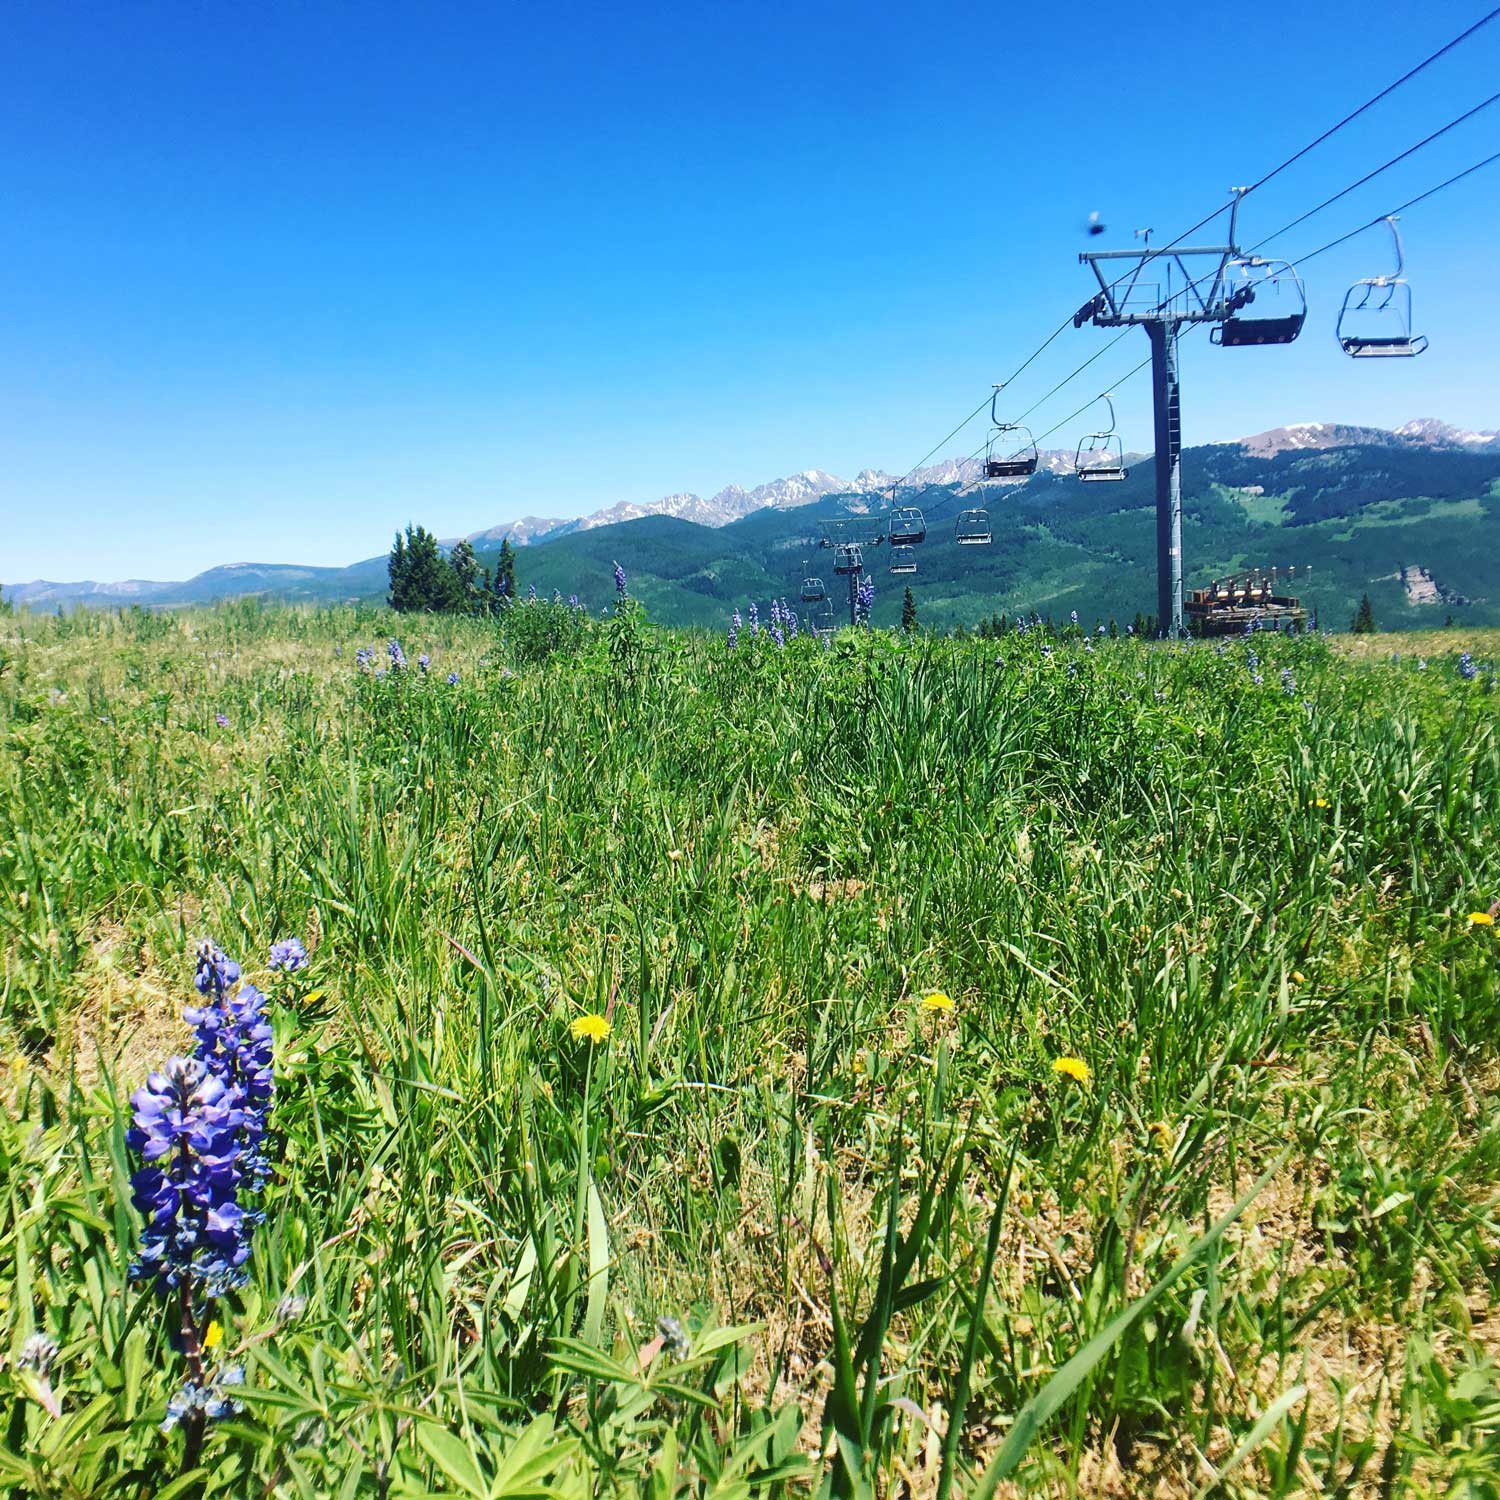 Your Vail summer family vacation really needs to include a ride up the gondola for the views!